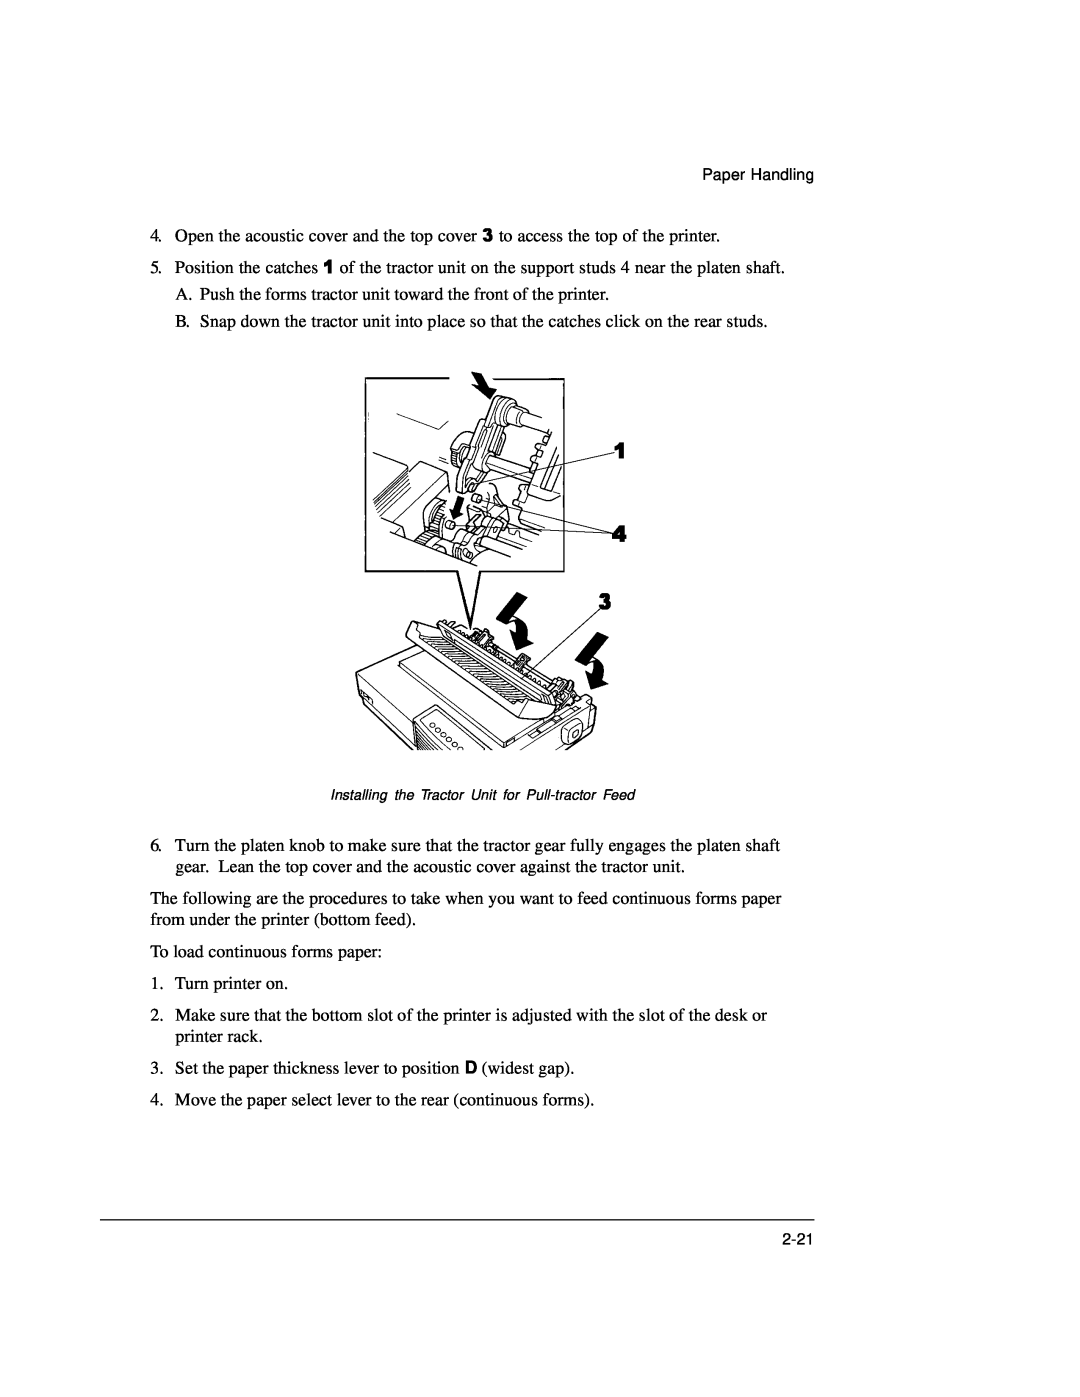 Genicom LA36 manual A. Push the forms tractor unit toward the front of the printer 